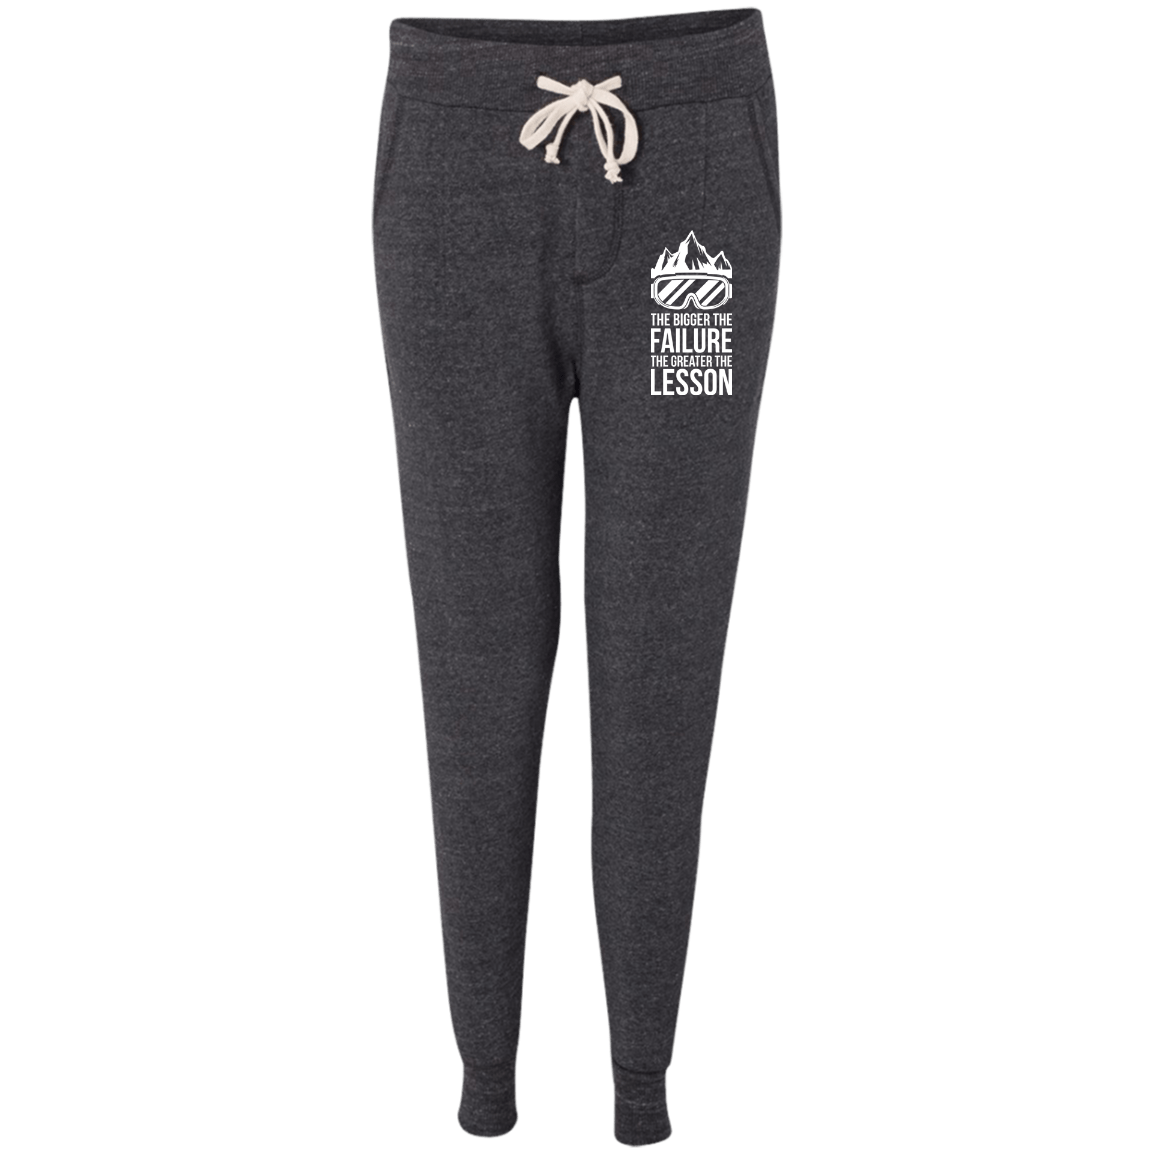 The Bigger The Failure The Greater The Lesson Women's Adult Fleece Jogger - Powderaddicts